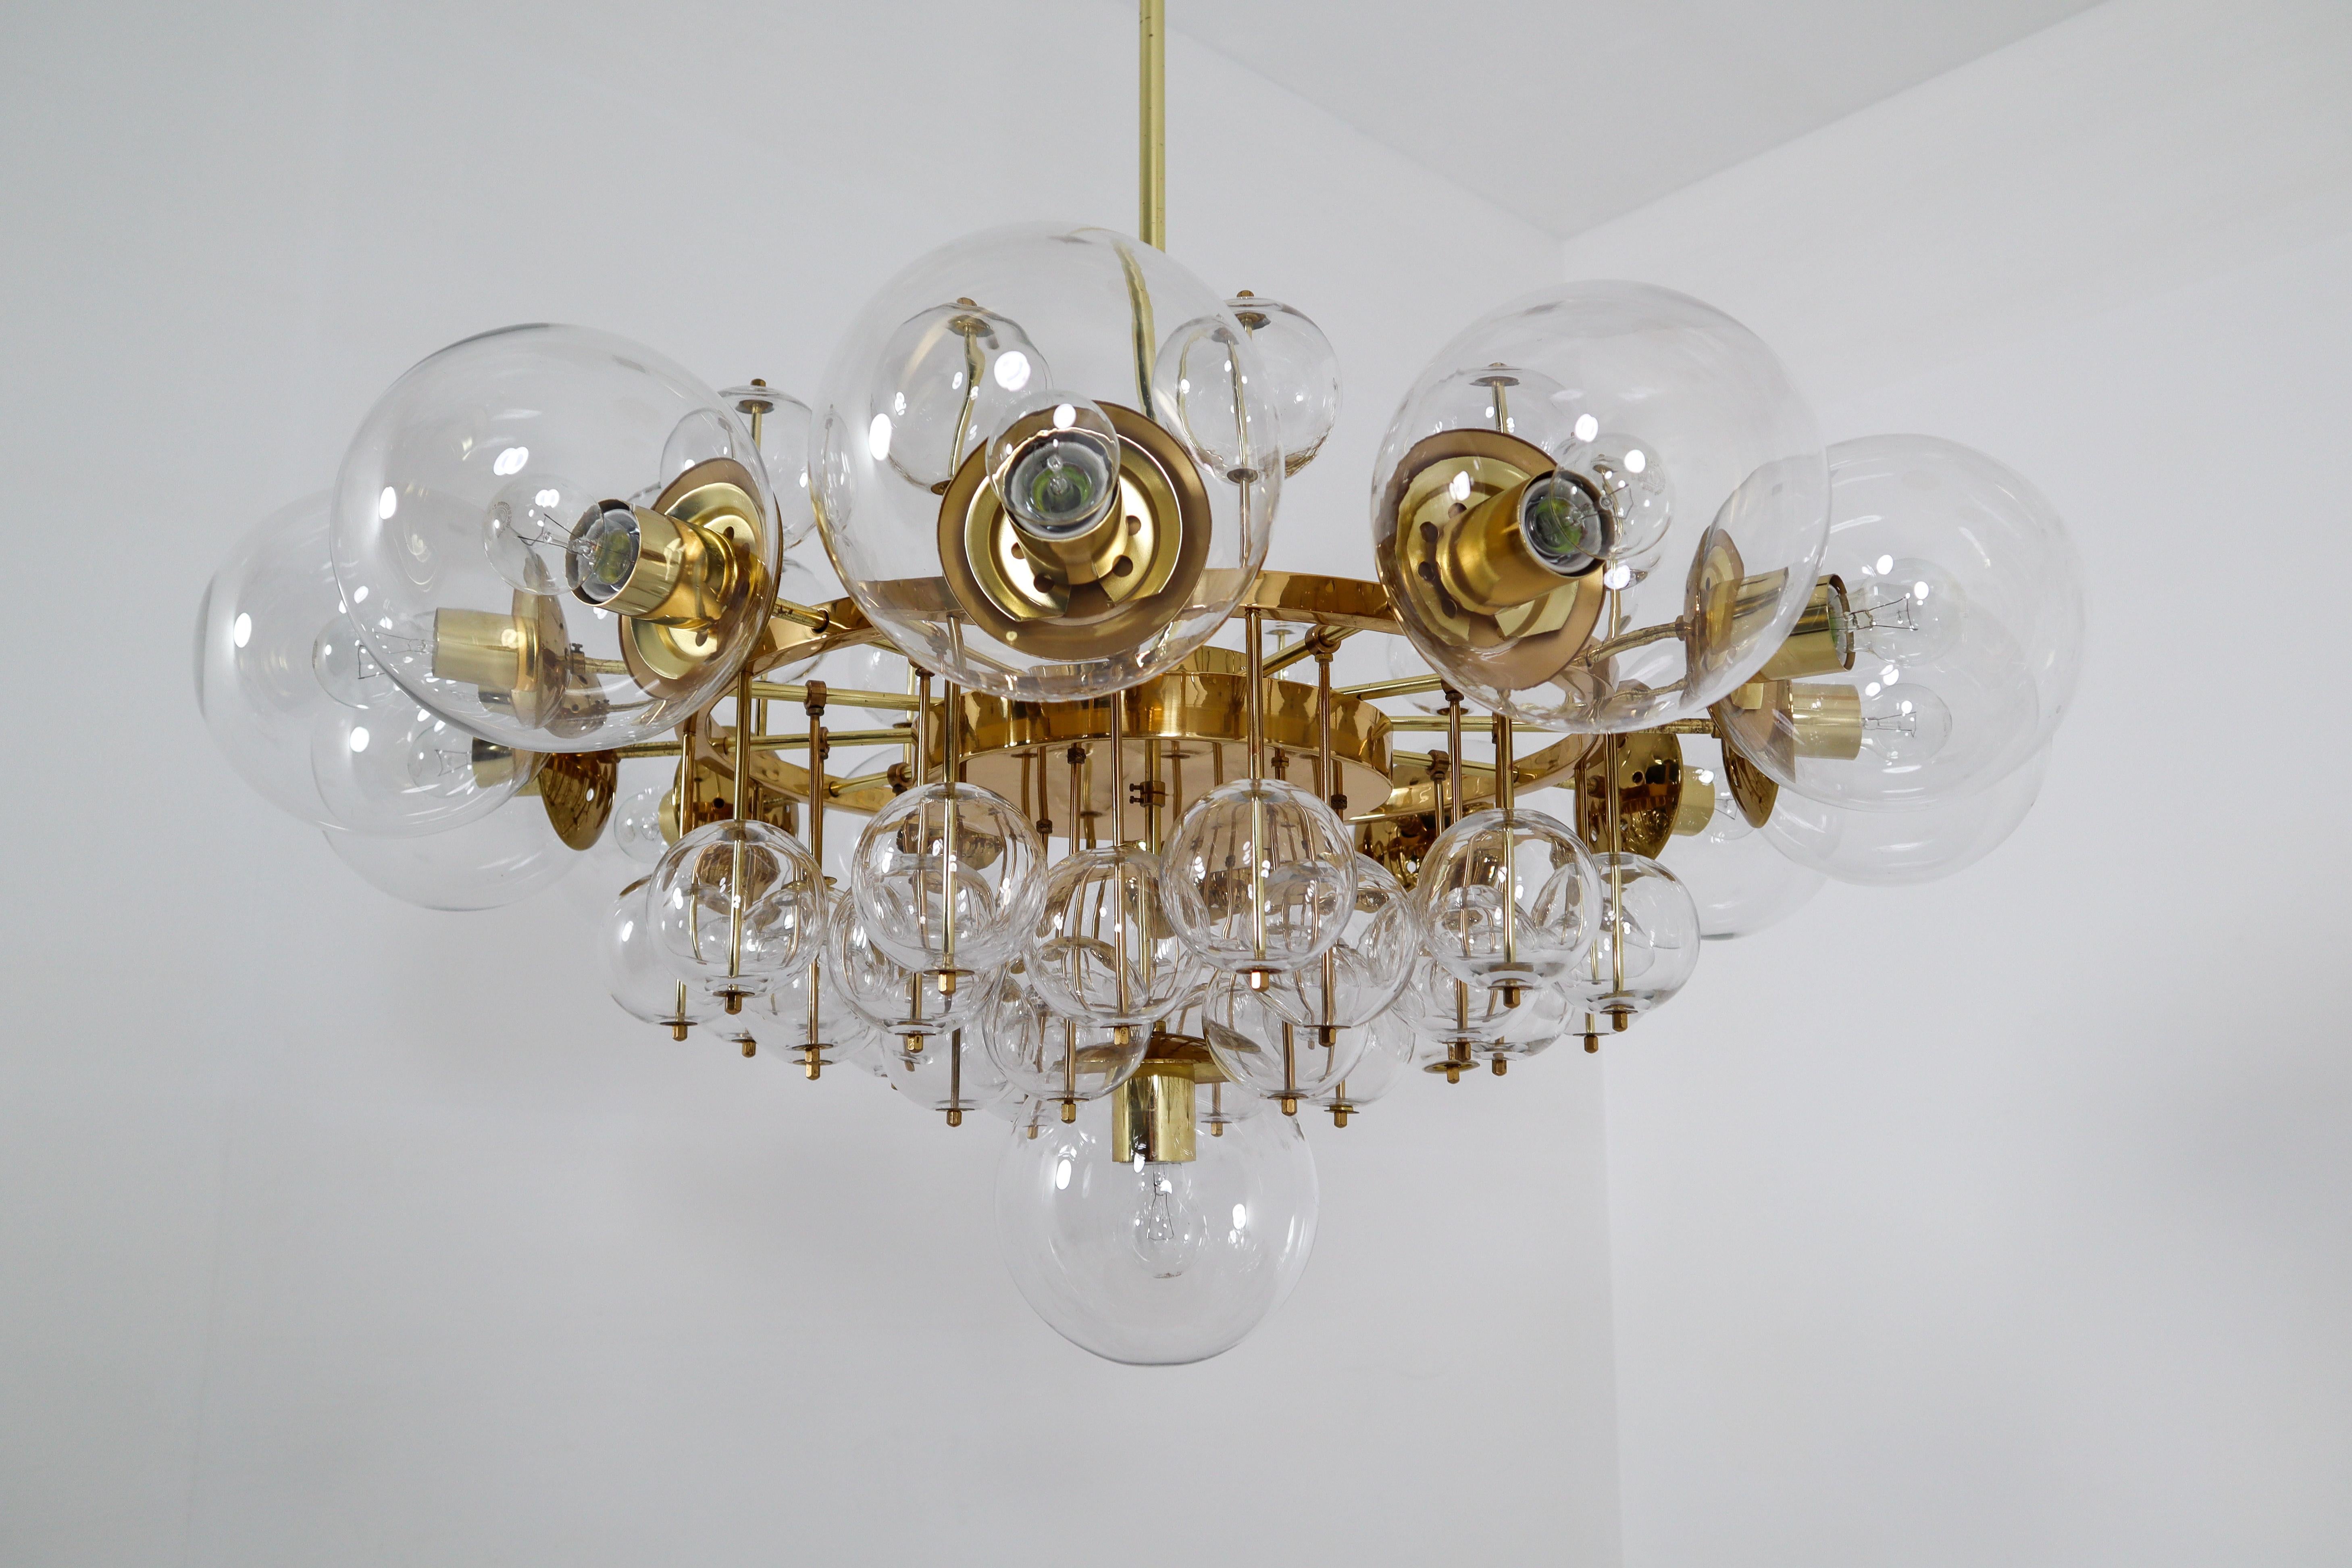 Large midcentury hotel chandelier with brass fixture, large hand blowed glass globes and smaller hand blowedglass globes. The pleasant light it spreads is very atmospheric. Completed with the clear glass and brass details, this large chandelier will